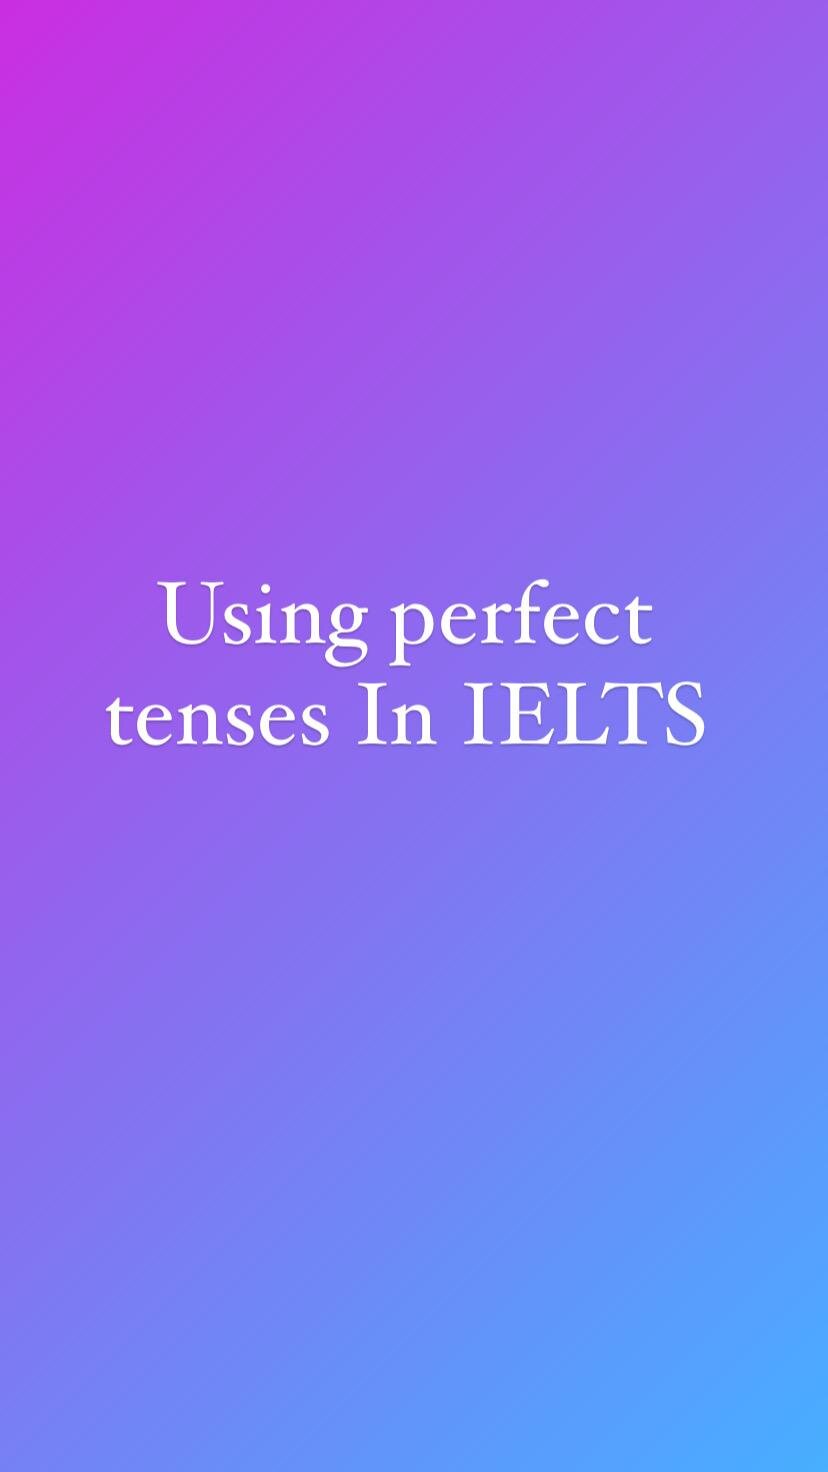 How to use perfect tenses in IELTS 